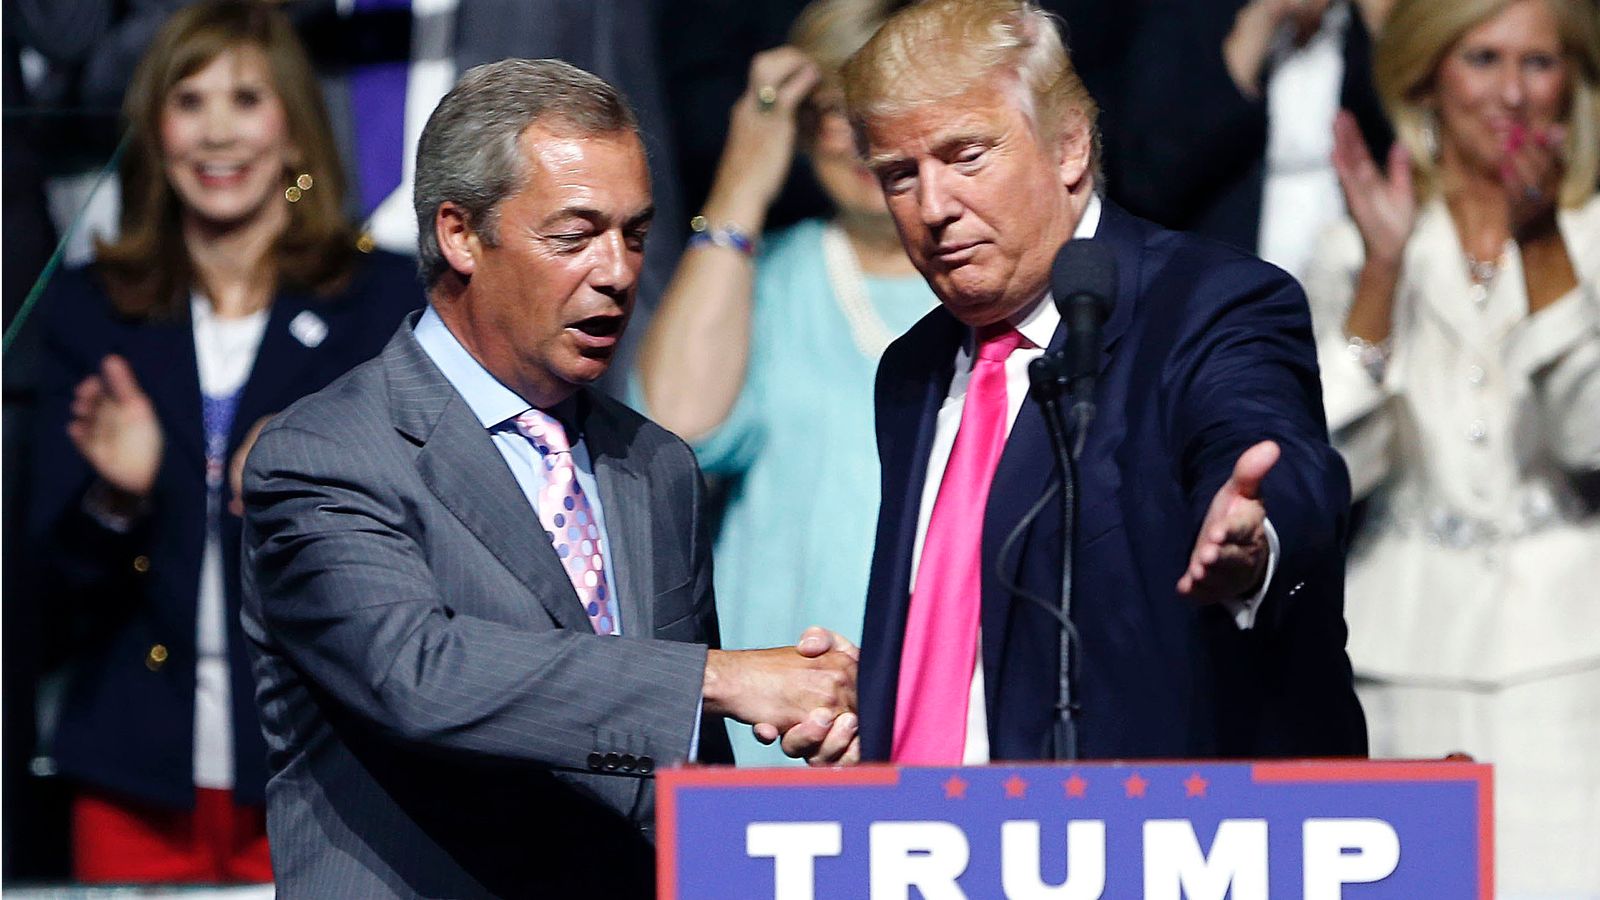 Donald Trump congratulates Nigel Farage on being elected an MP - but makes no mention of Sir Keir Starmer